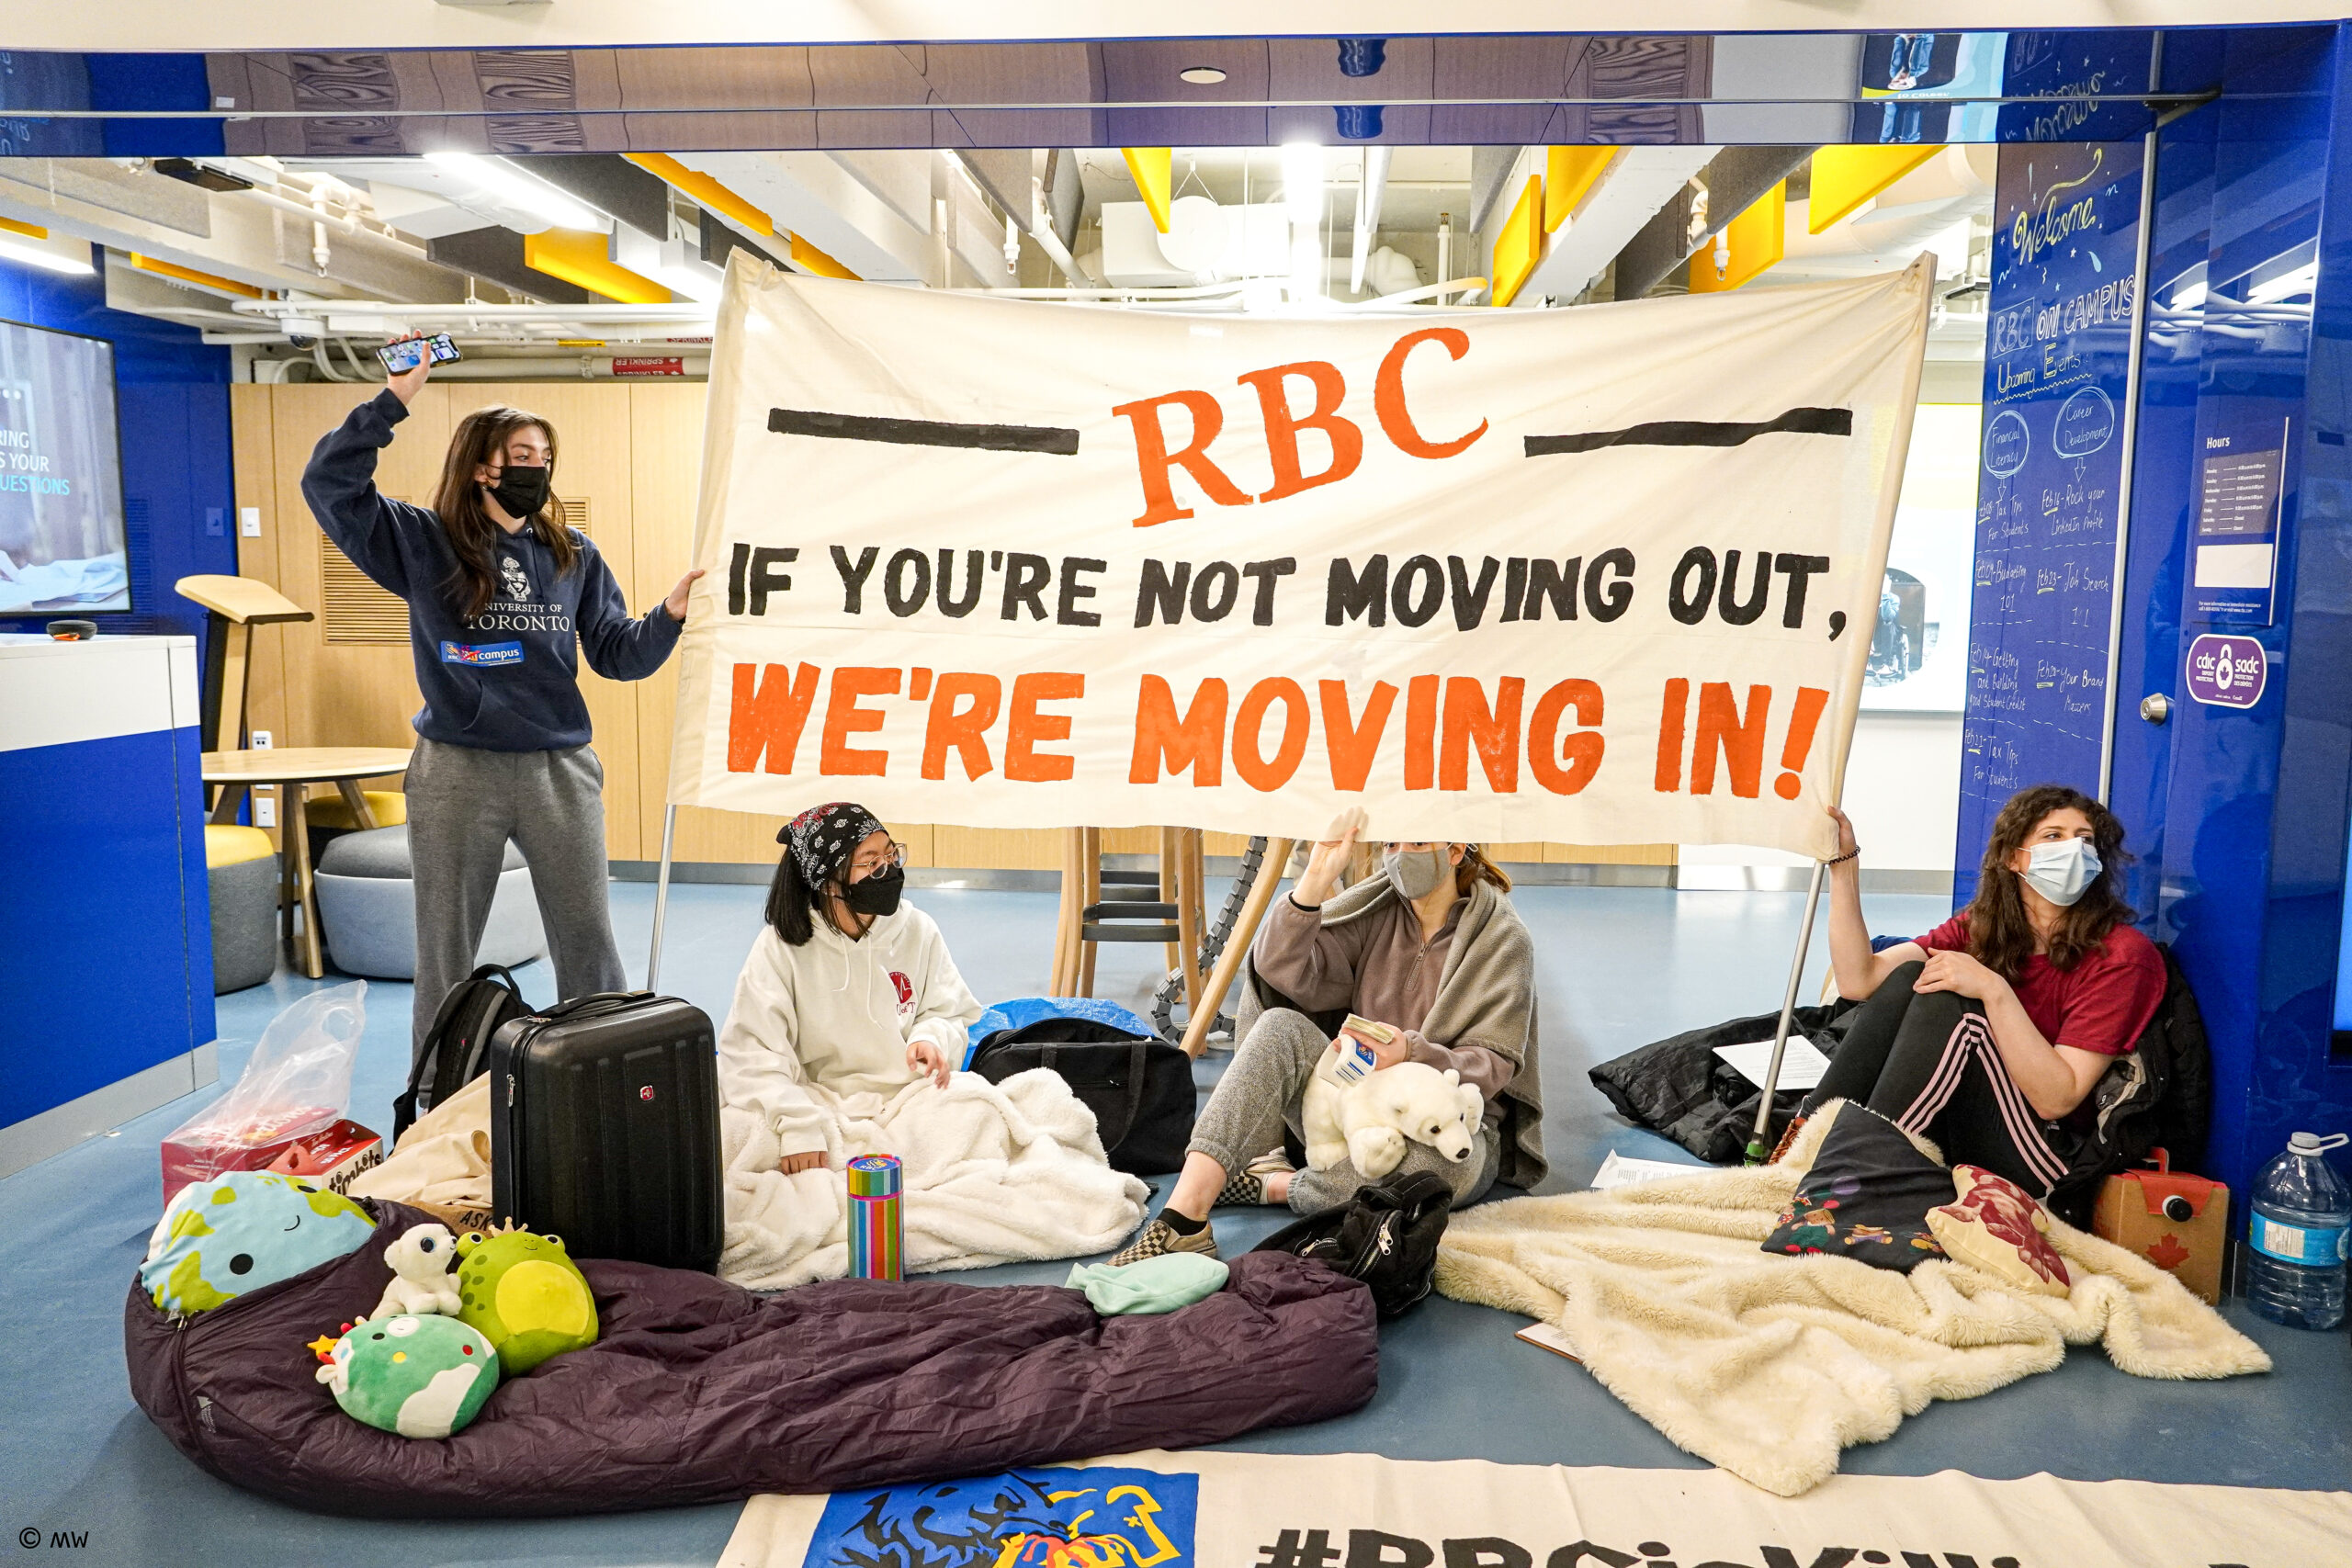 A photo of Climate Justice University of Toronto students doing a sit-in protest in the RBC OnCampus branch. A white woman in a red shirt sits on the ground holding the base of a banner. Another white person is partially visible behind the banner, a chinese woman sits in front, they are all on blankets and pillows. A green pillow pet stuffed animal is visible. A white woman with brown hear wearing a sweat suit stands beside the banner with her fist raised. The banner reads "RBC, If you're not moving out, we're moving in!" All of the students are wearing masks.